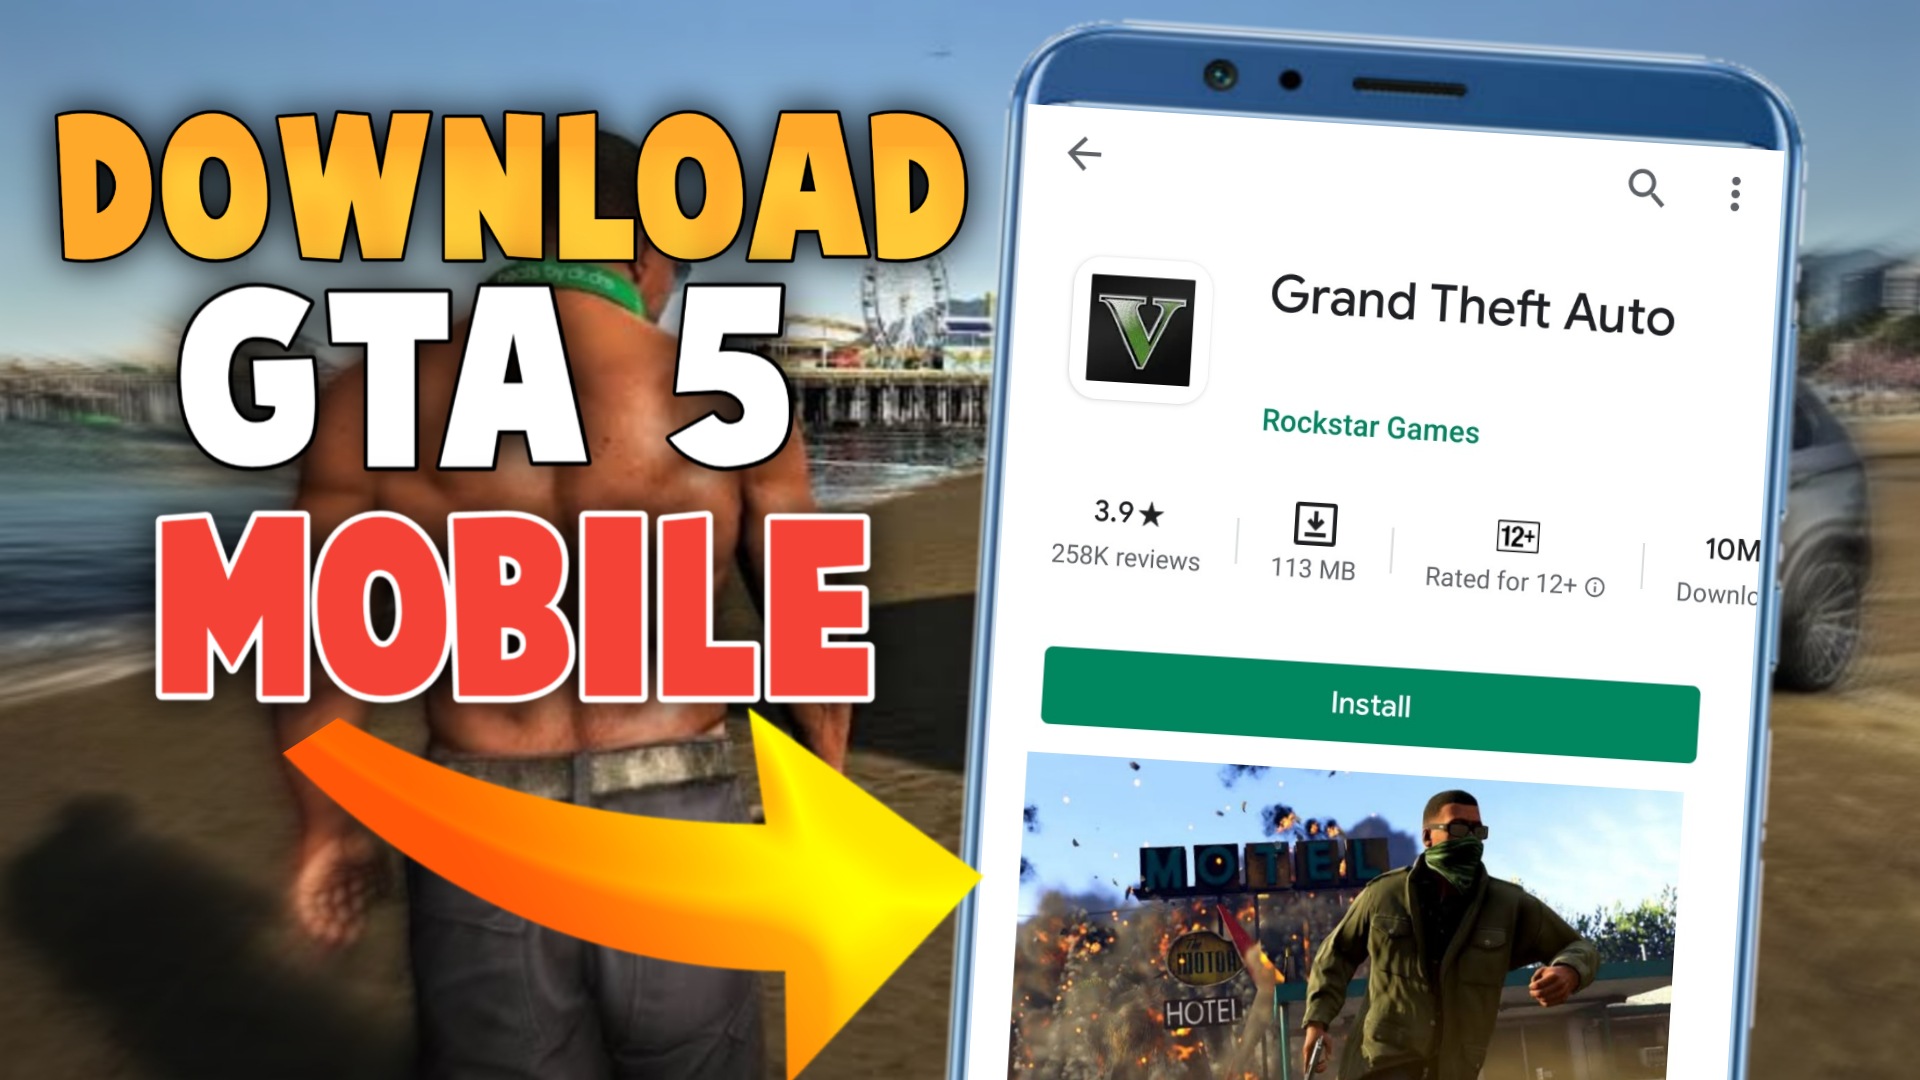 is there a gta 5 mobile apk